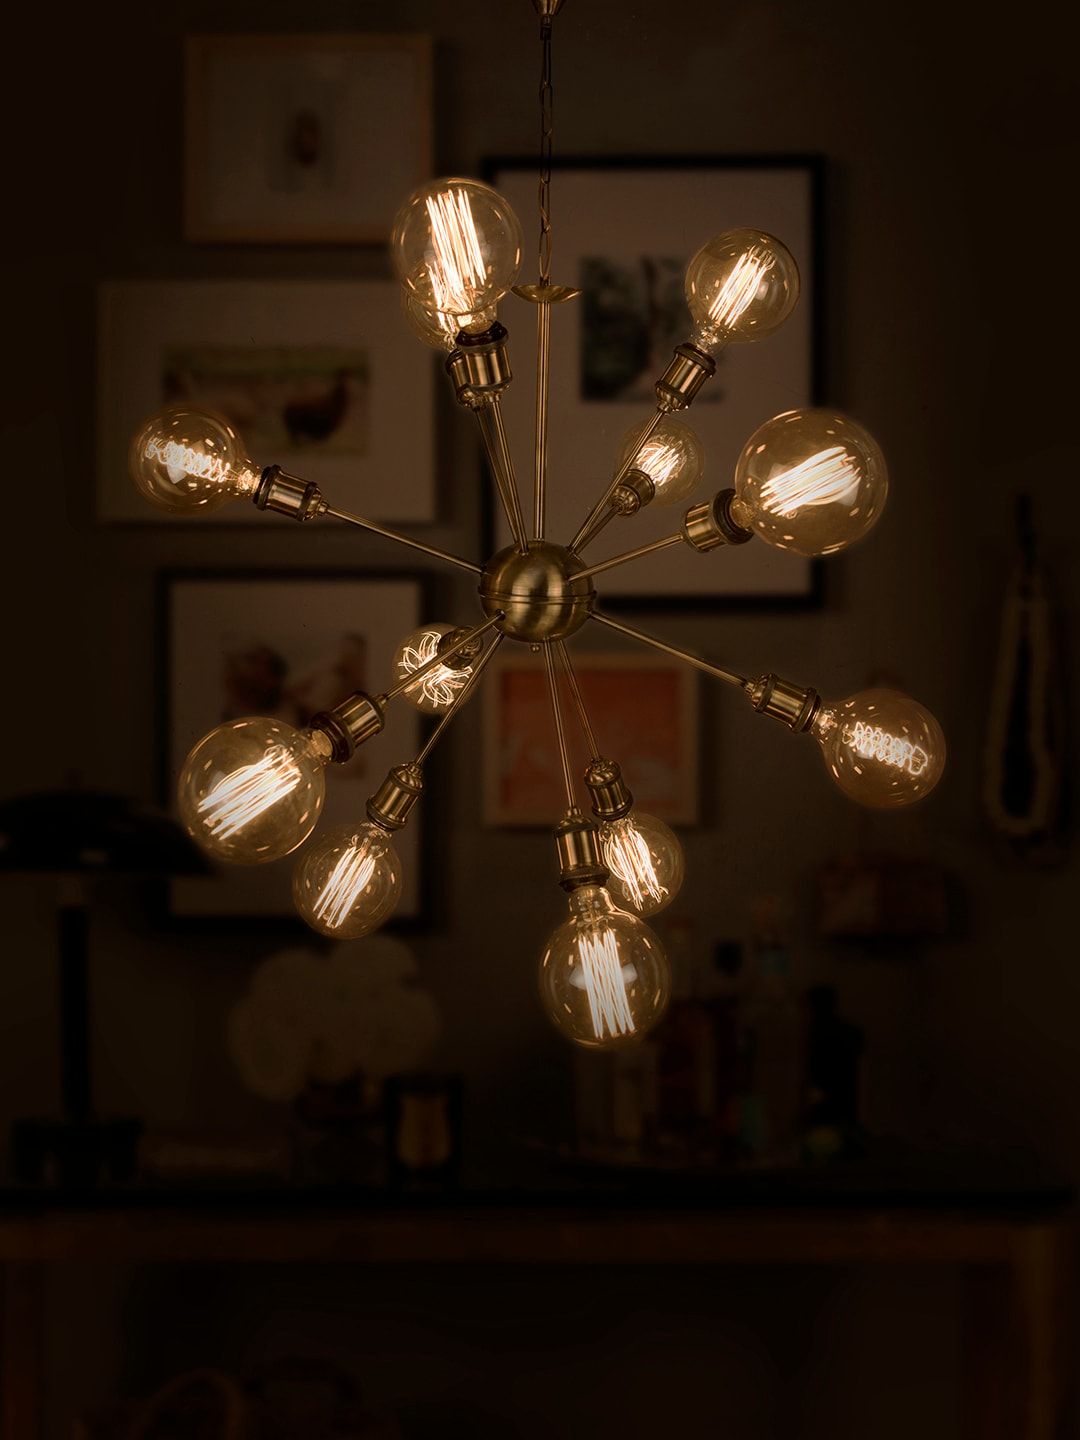 Fos Lighting Silver-Toned Solid Antique Cluster Lights Price in India